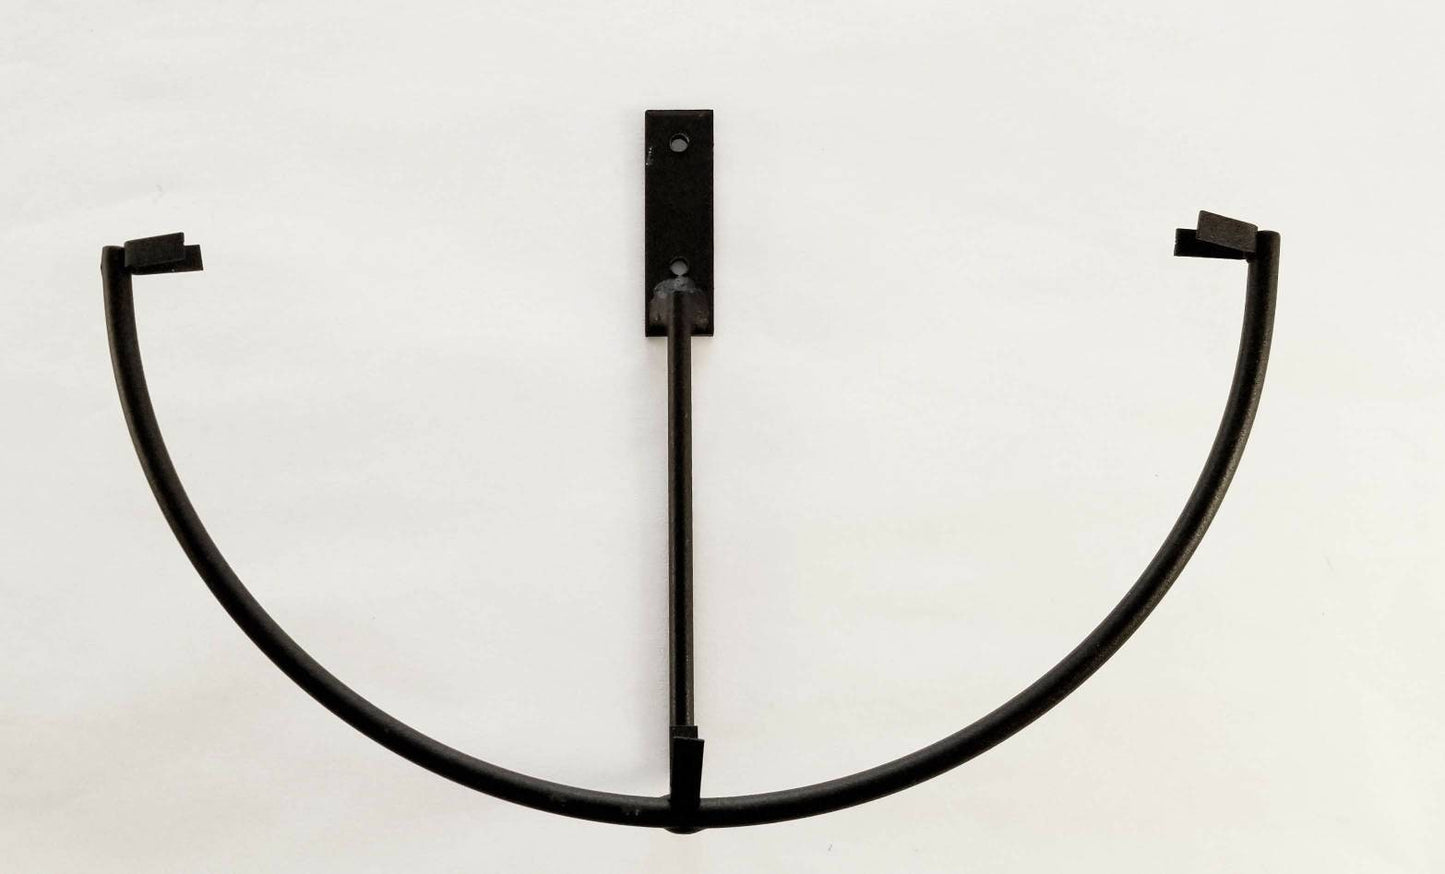 Round Stand, Plate Holder, Wall Mounted Matte Black Finish, 10" Frame for Fused Glass Discs or Stained Glass Projects. Display for Wall Art.